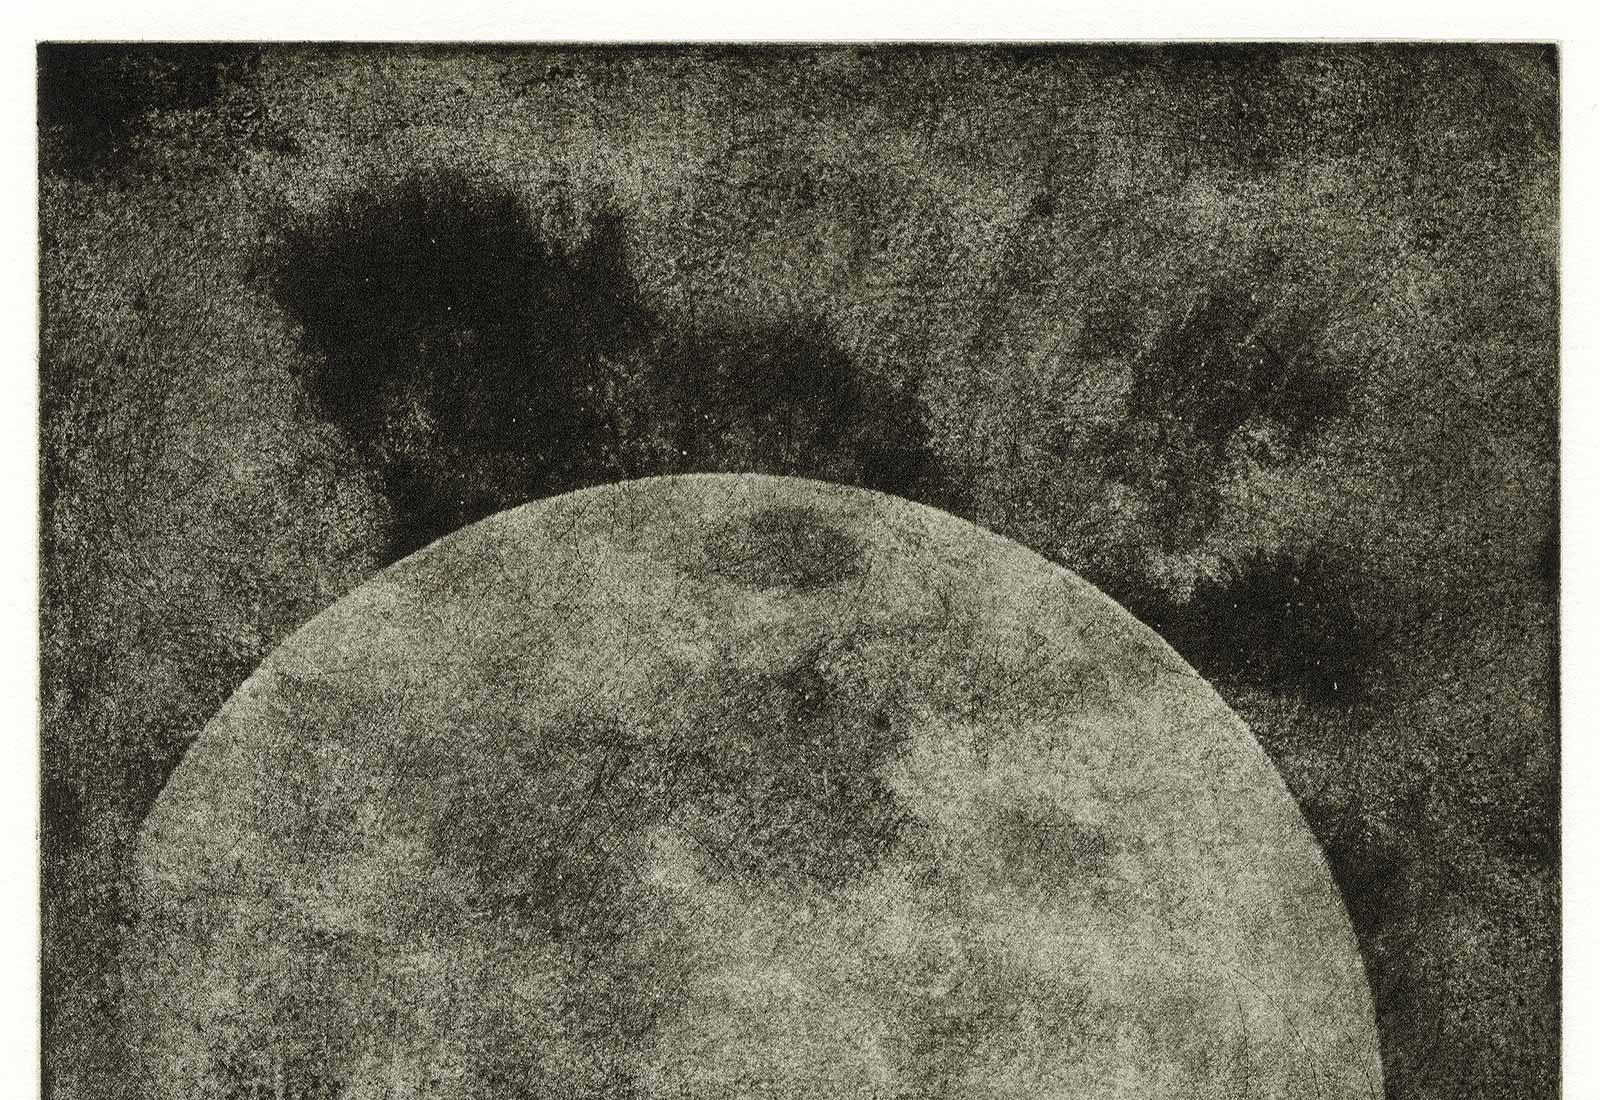 Moon ( from the artist's Lunar Series) - Photograph by Ted Kincaid